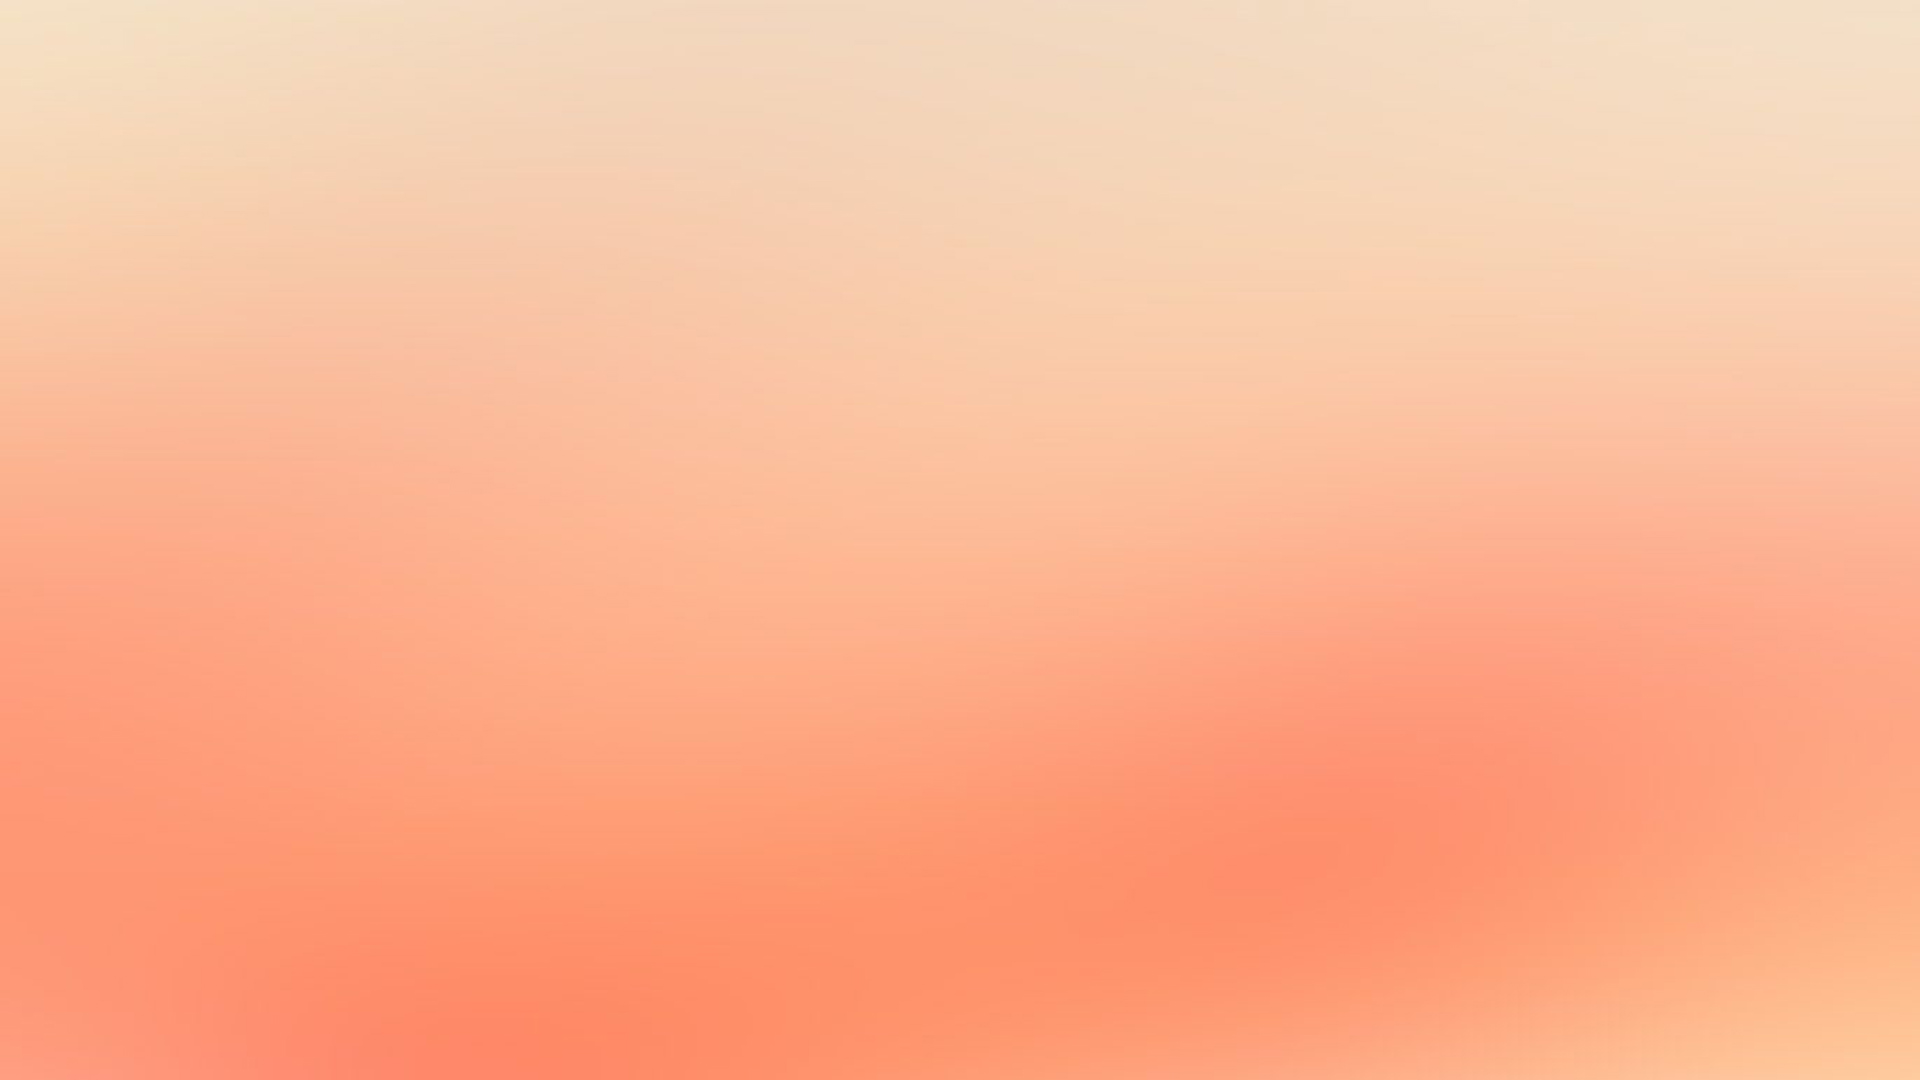 Peach Color Background Images HD Pictures and Wallpaper For Free Download   Pngtree